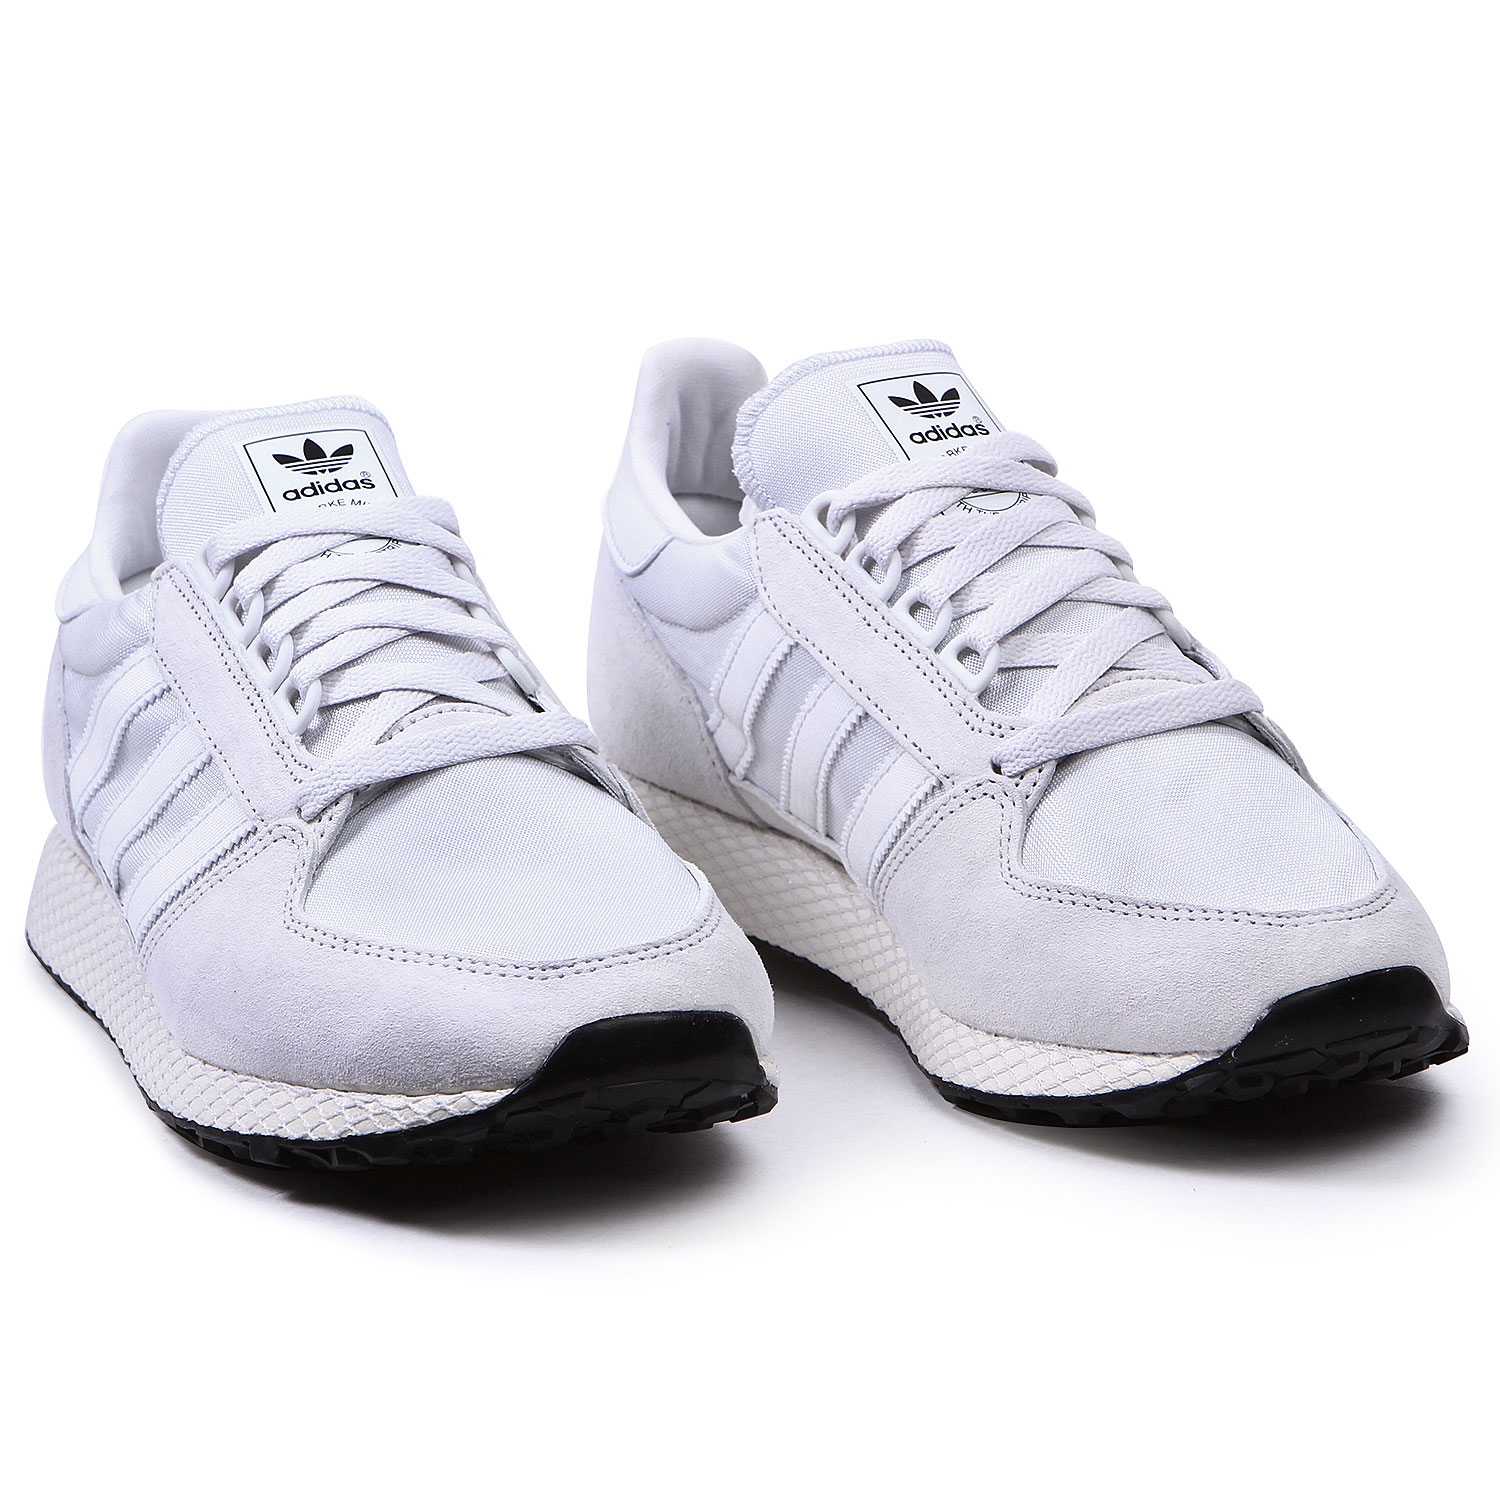 Adidas ORIGINALS FOREST GROVE crystal white / crystal white / core black